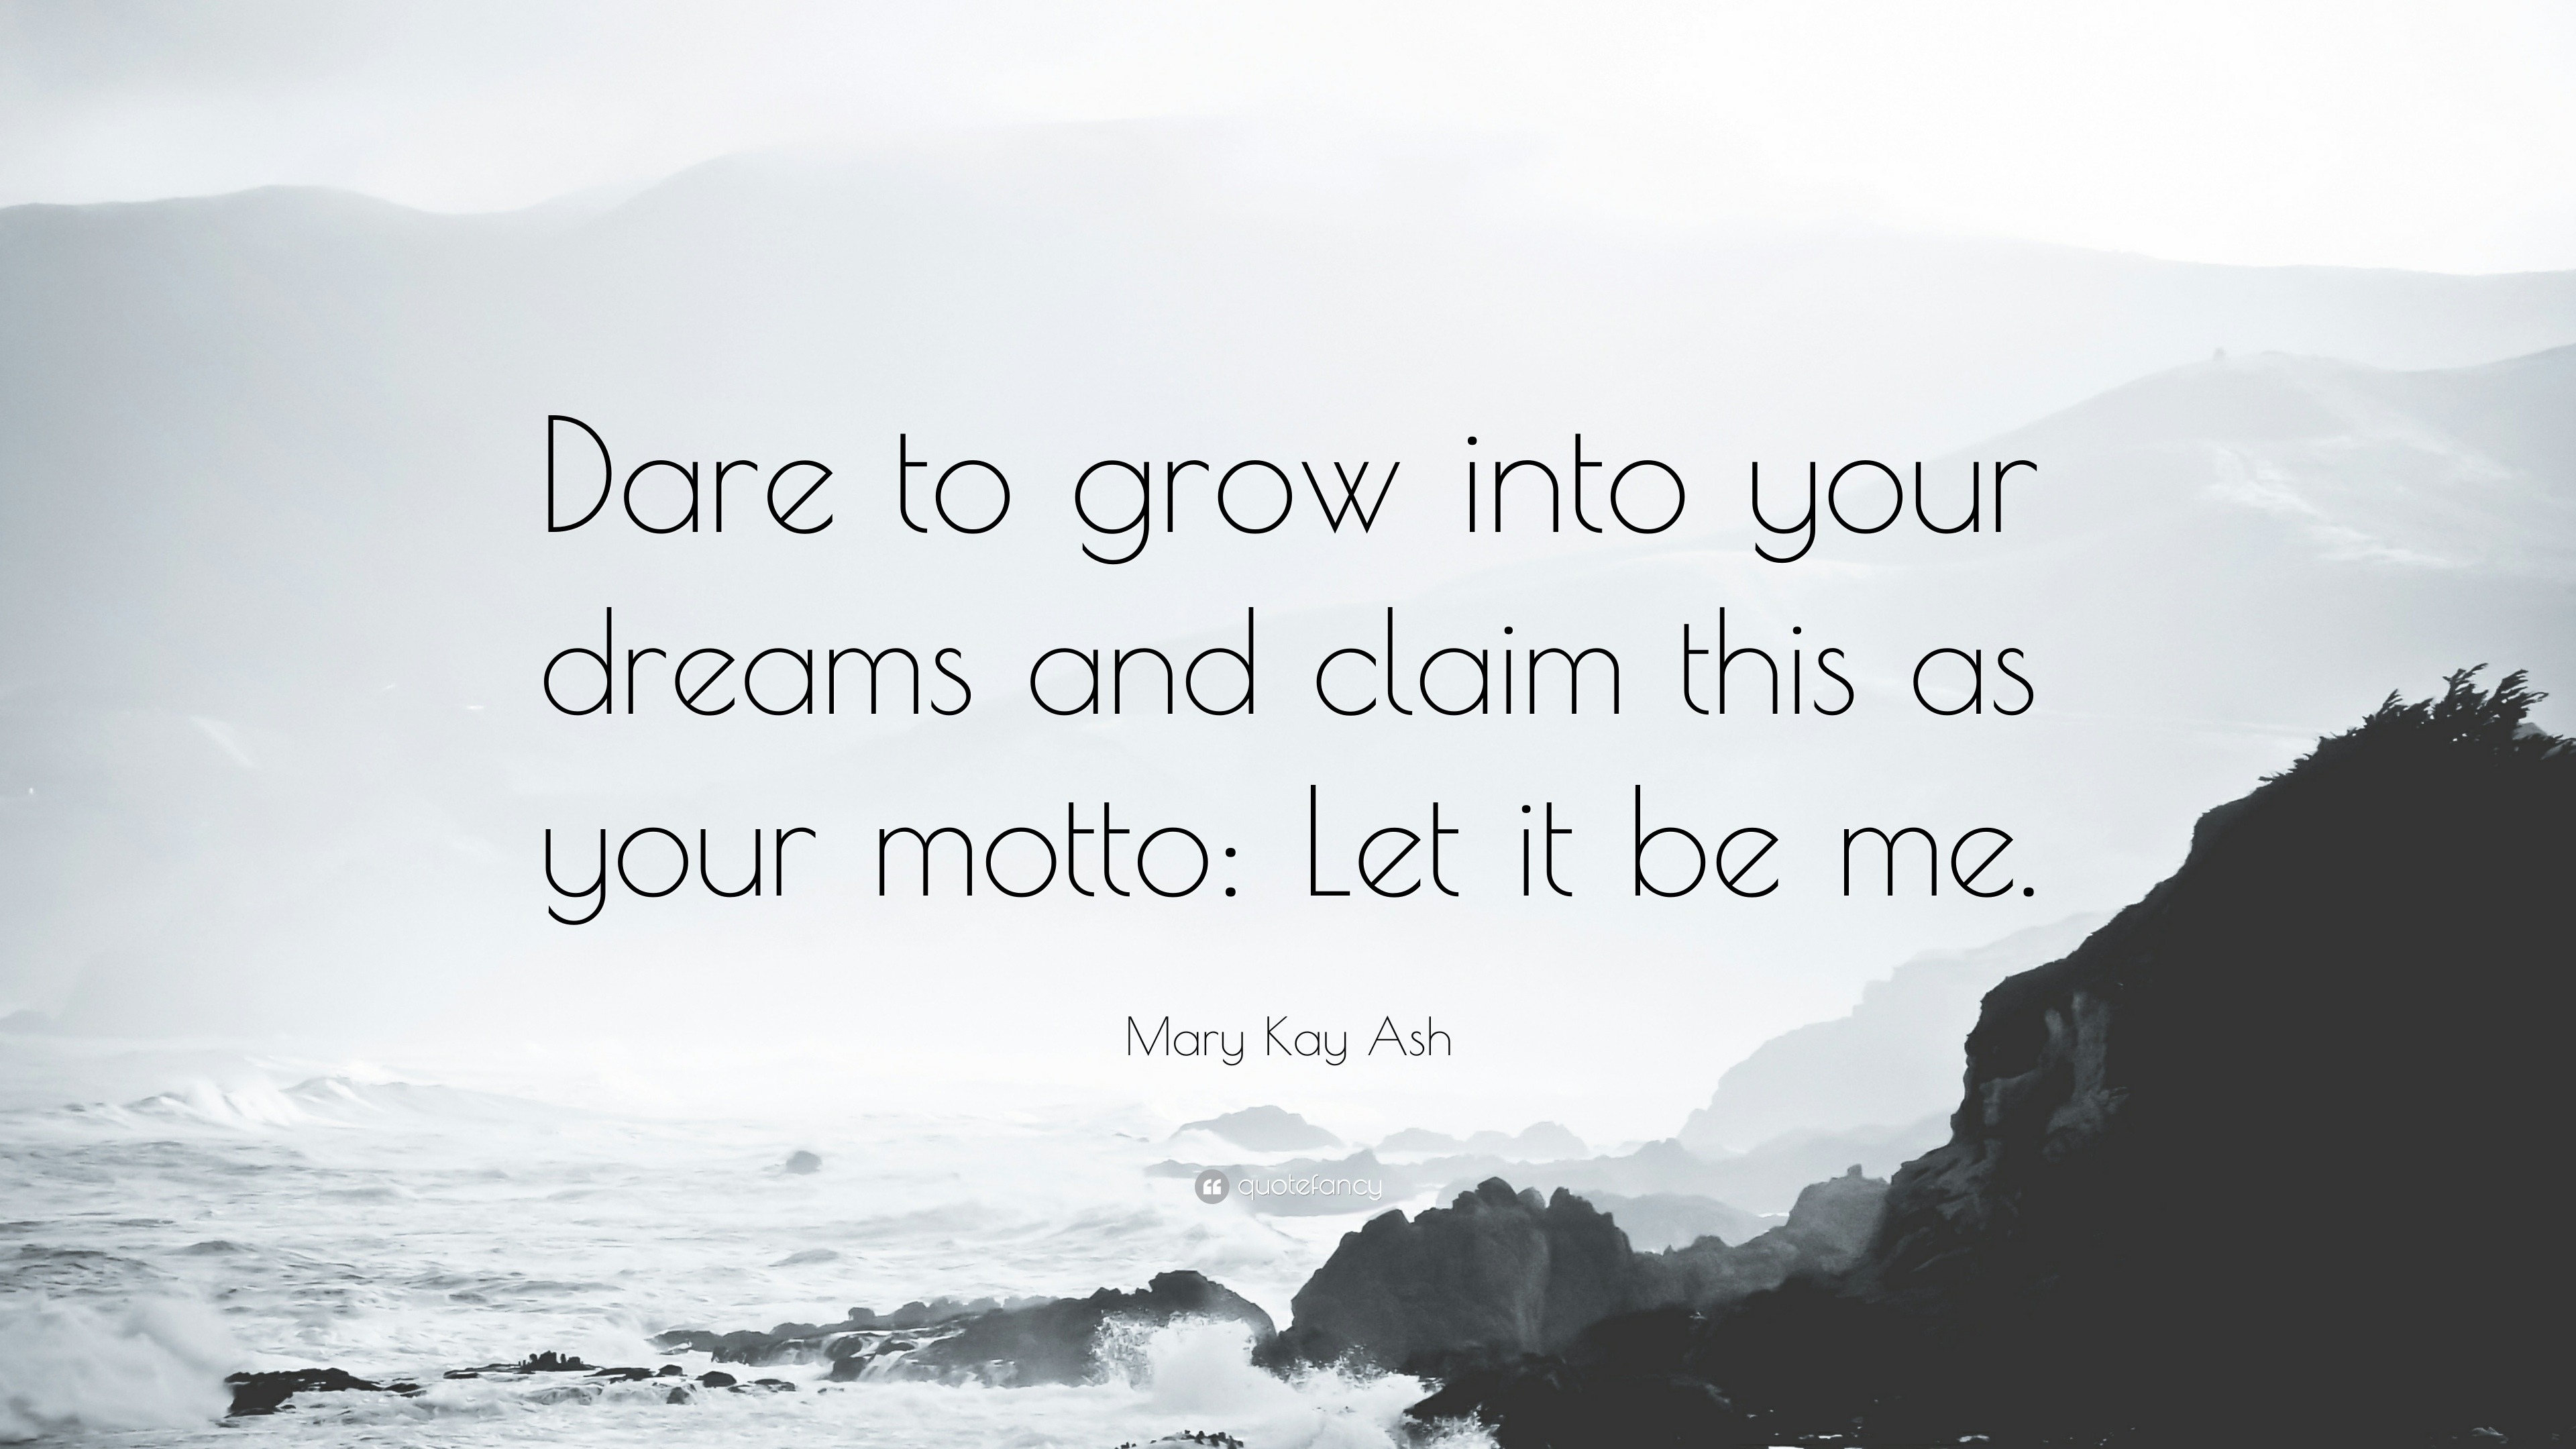 Mary Kay Ash Quote: “Dare to grow into your dreams and claim this as